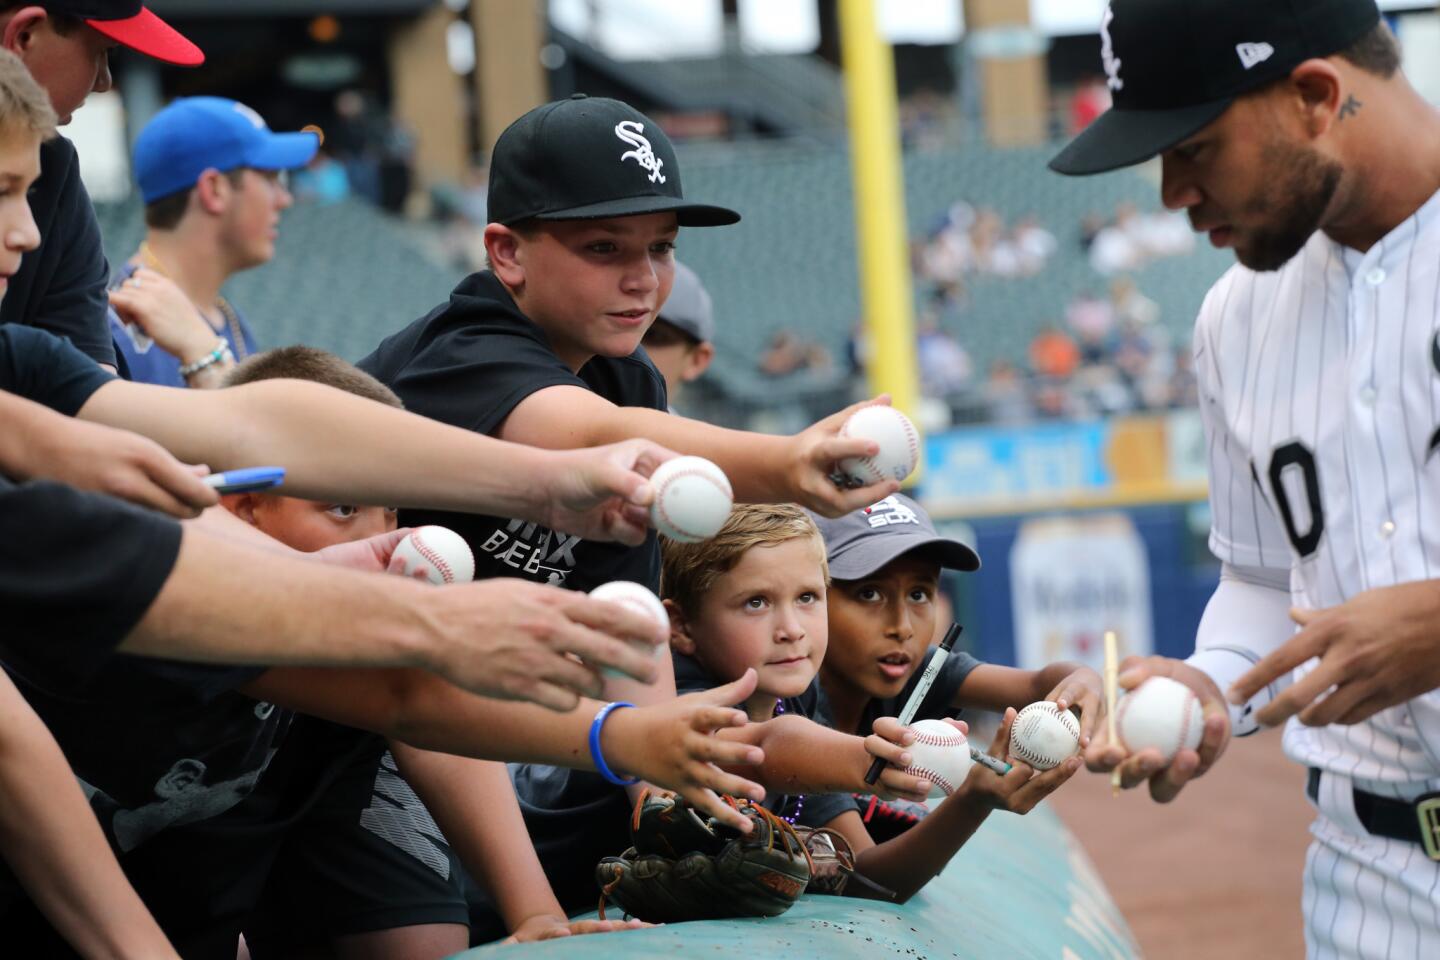 White Sox second baseman Yoan Moncada signs balls for young fans before the start of a game against the Yankees at Guaranteed Rate Field on Tuesday Aug. 7, 2018.